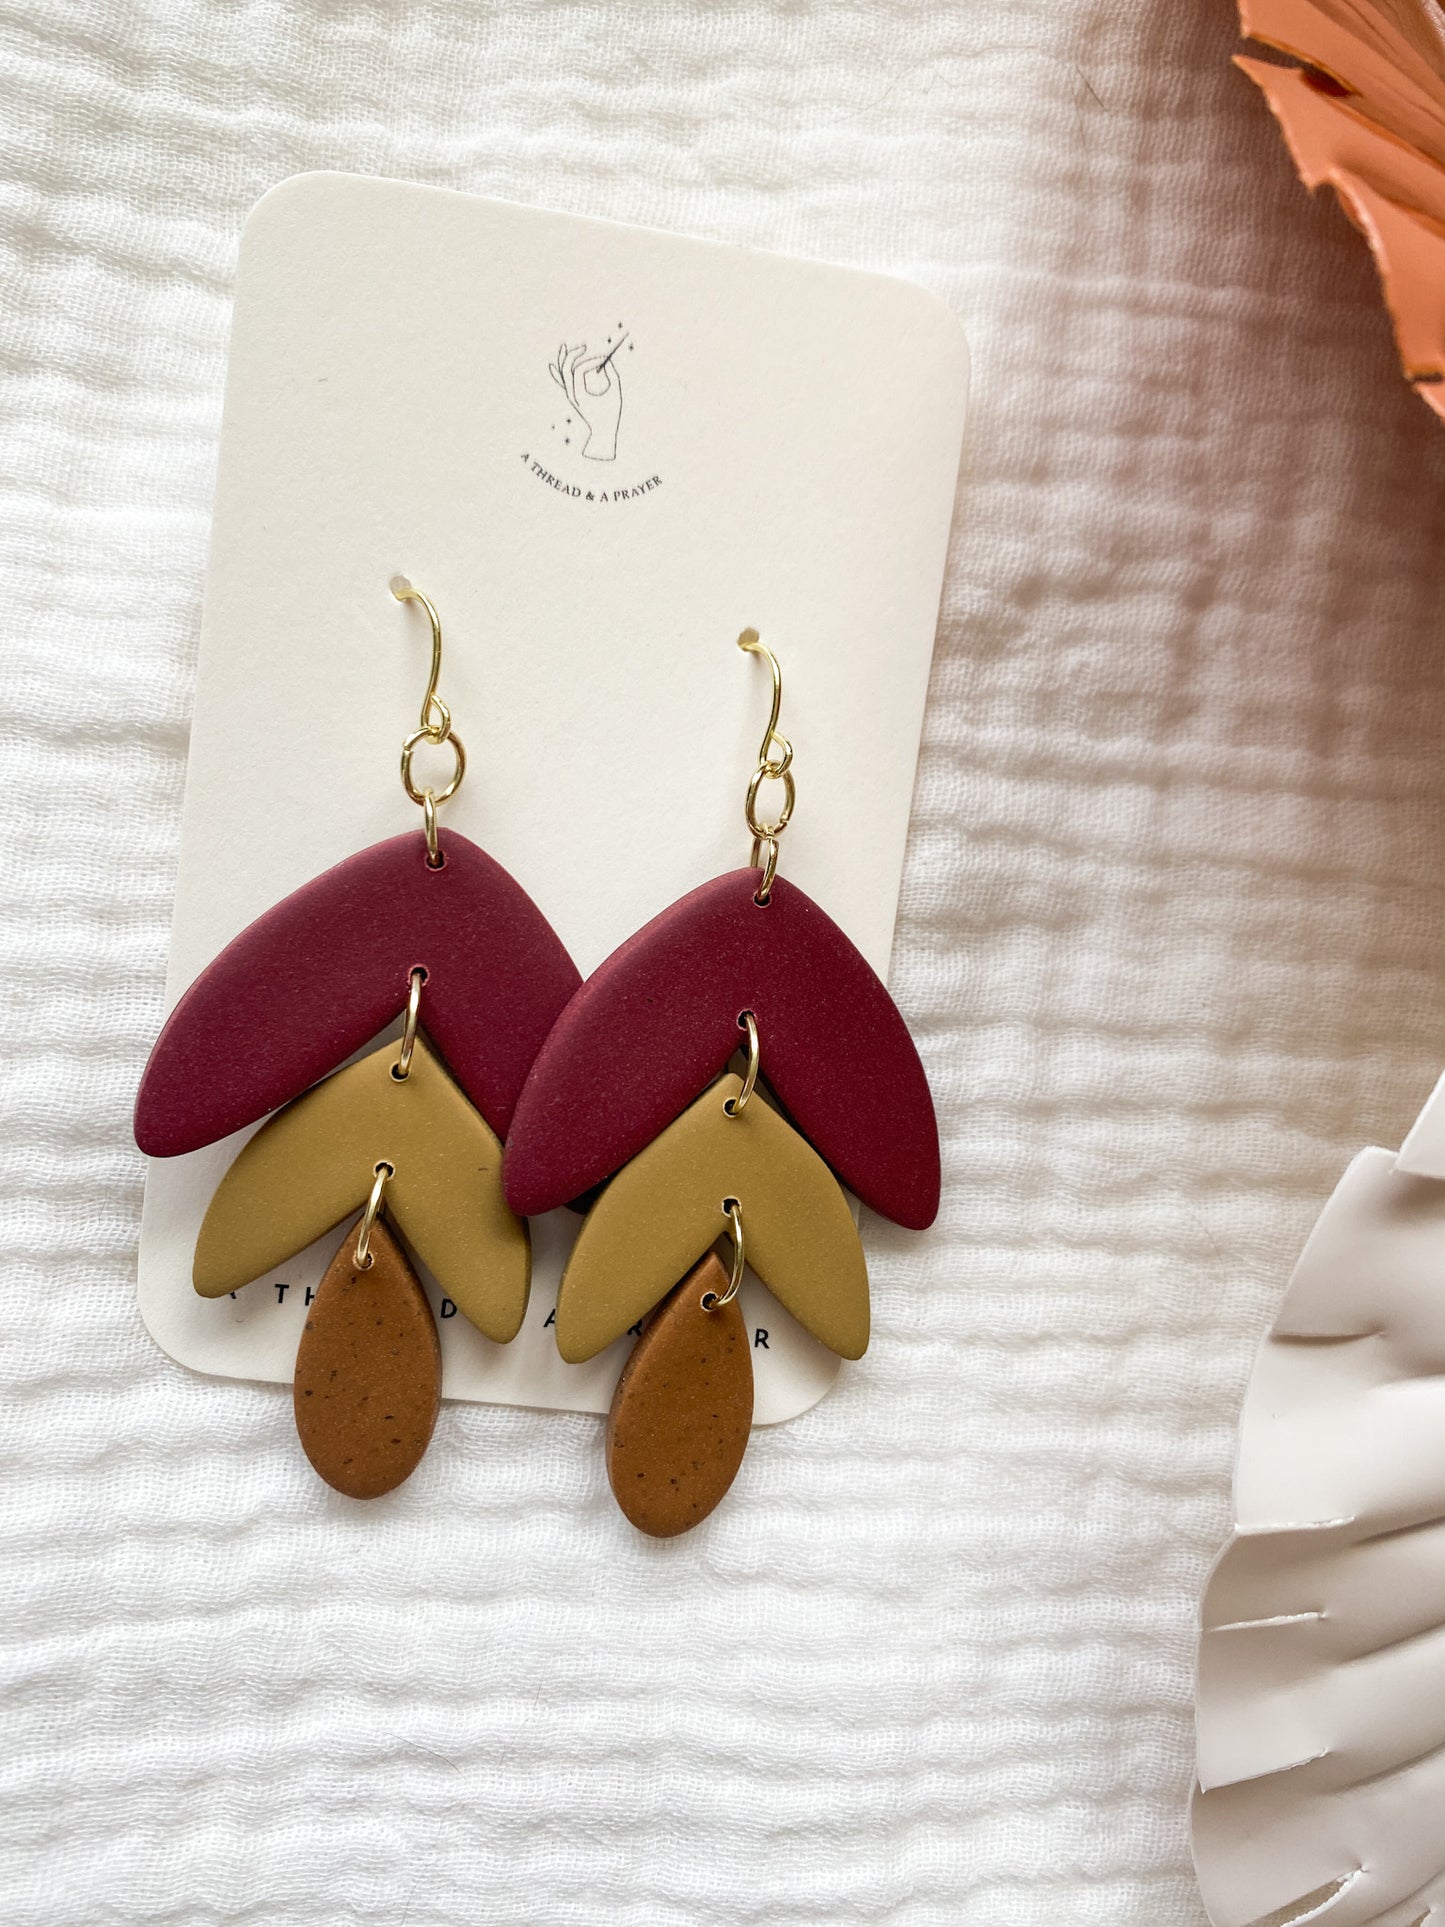 Boho Style Burgundy and Mustard Trendy Earrings | Polymer Clay | Lightweight